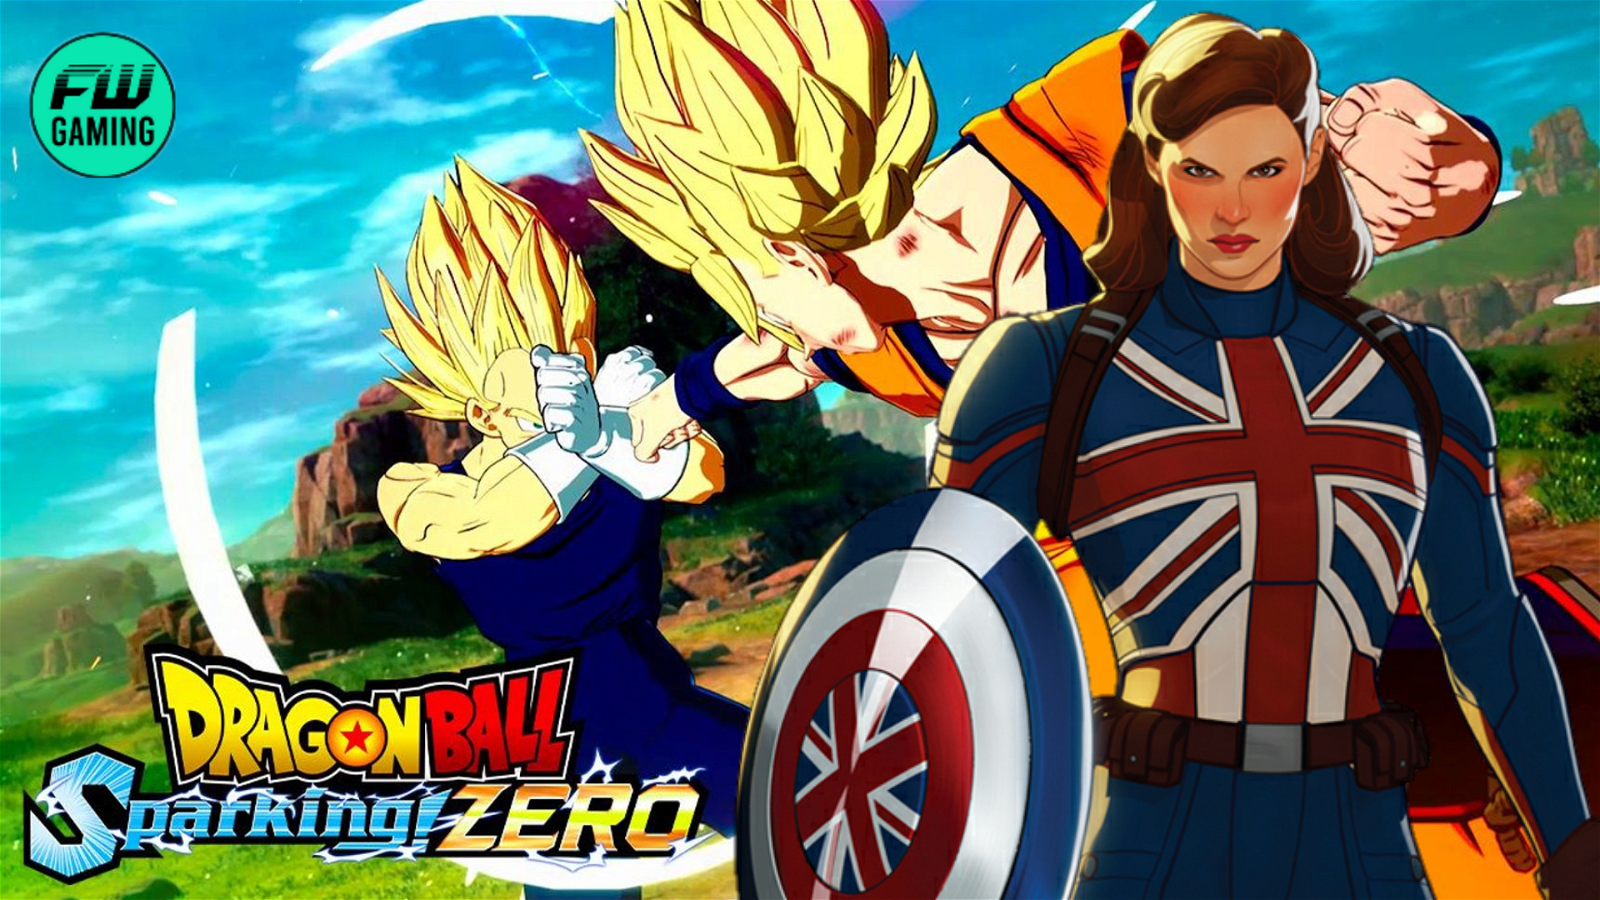 Dragon Ball: Sparking Zero Fans Agree It Should Copy One Marvel Show and Include One ‘Must-Have’ Feature to Push the Anime Fighting Game to the Top